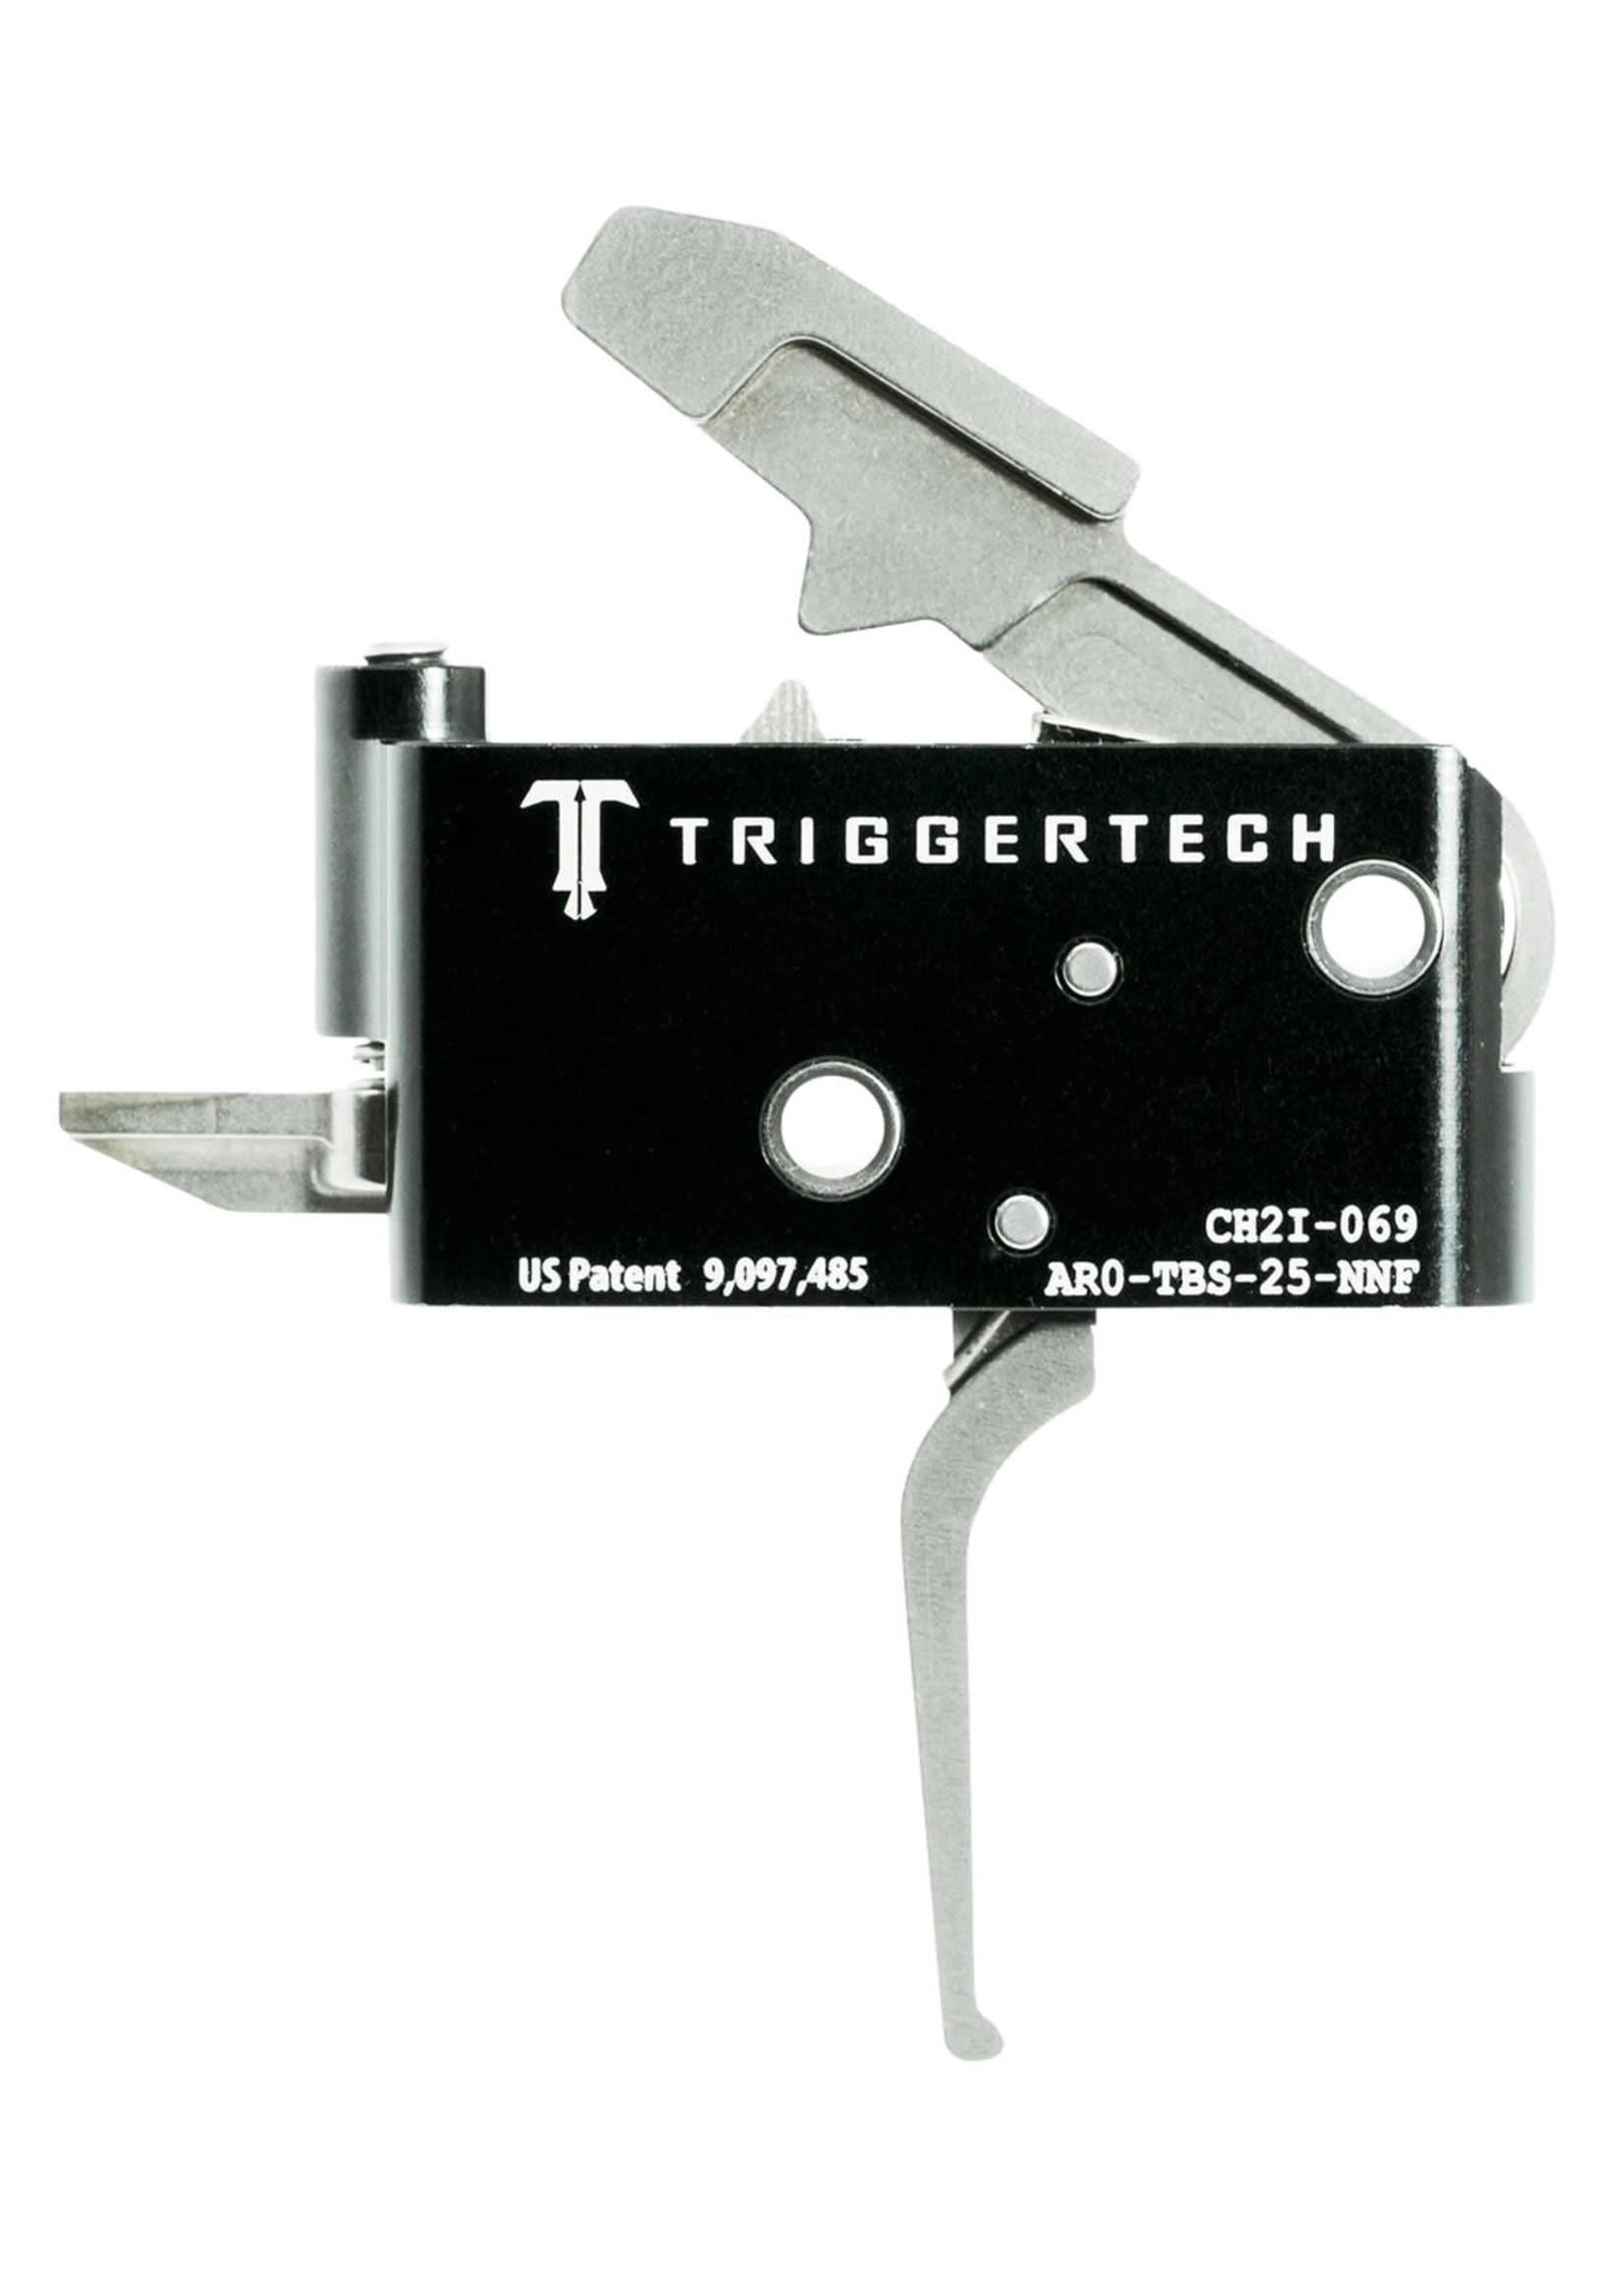 Trigger Tech TriggerTech Adaptable Primary AR-15 Stainless Two-Stage Flat 2.50-5.00 lbs Right